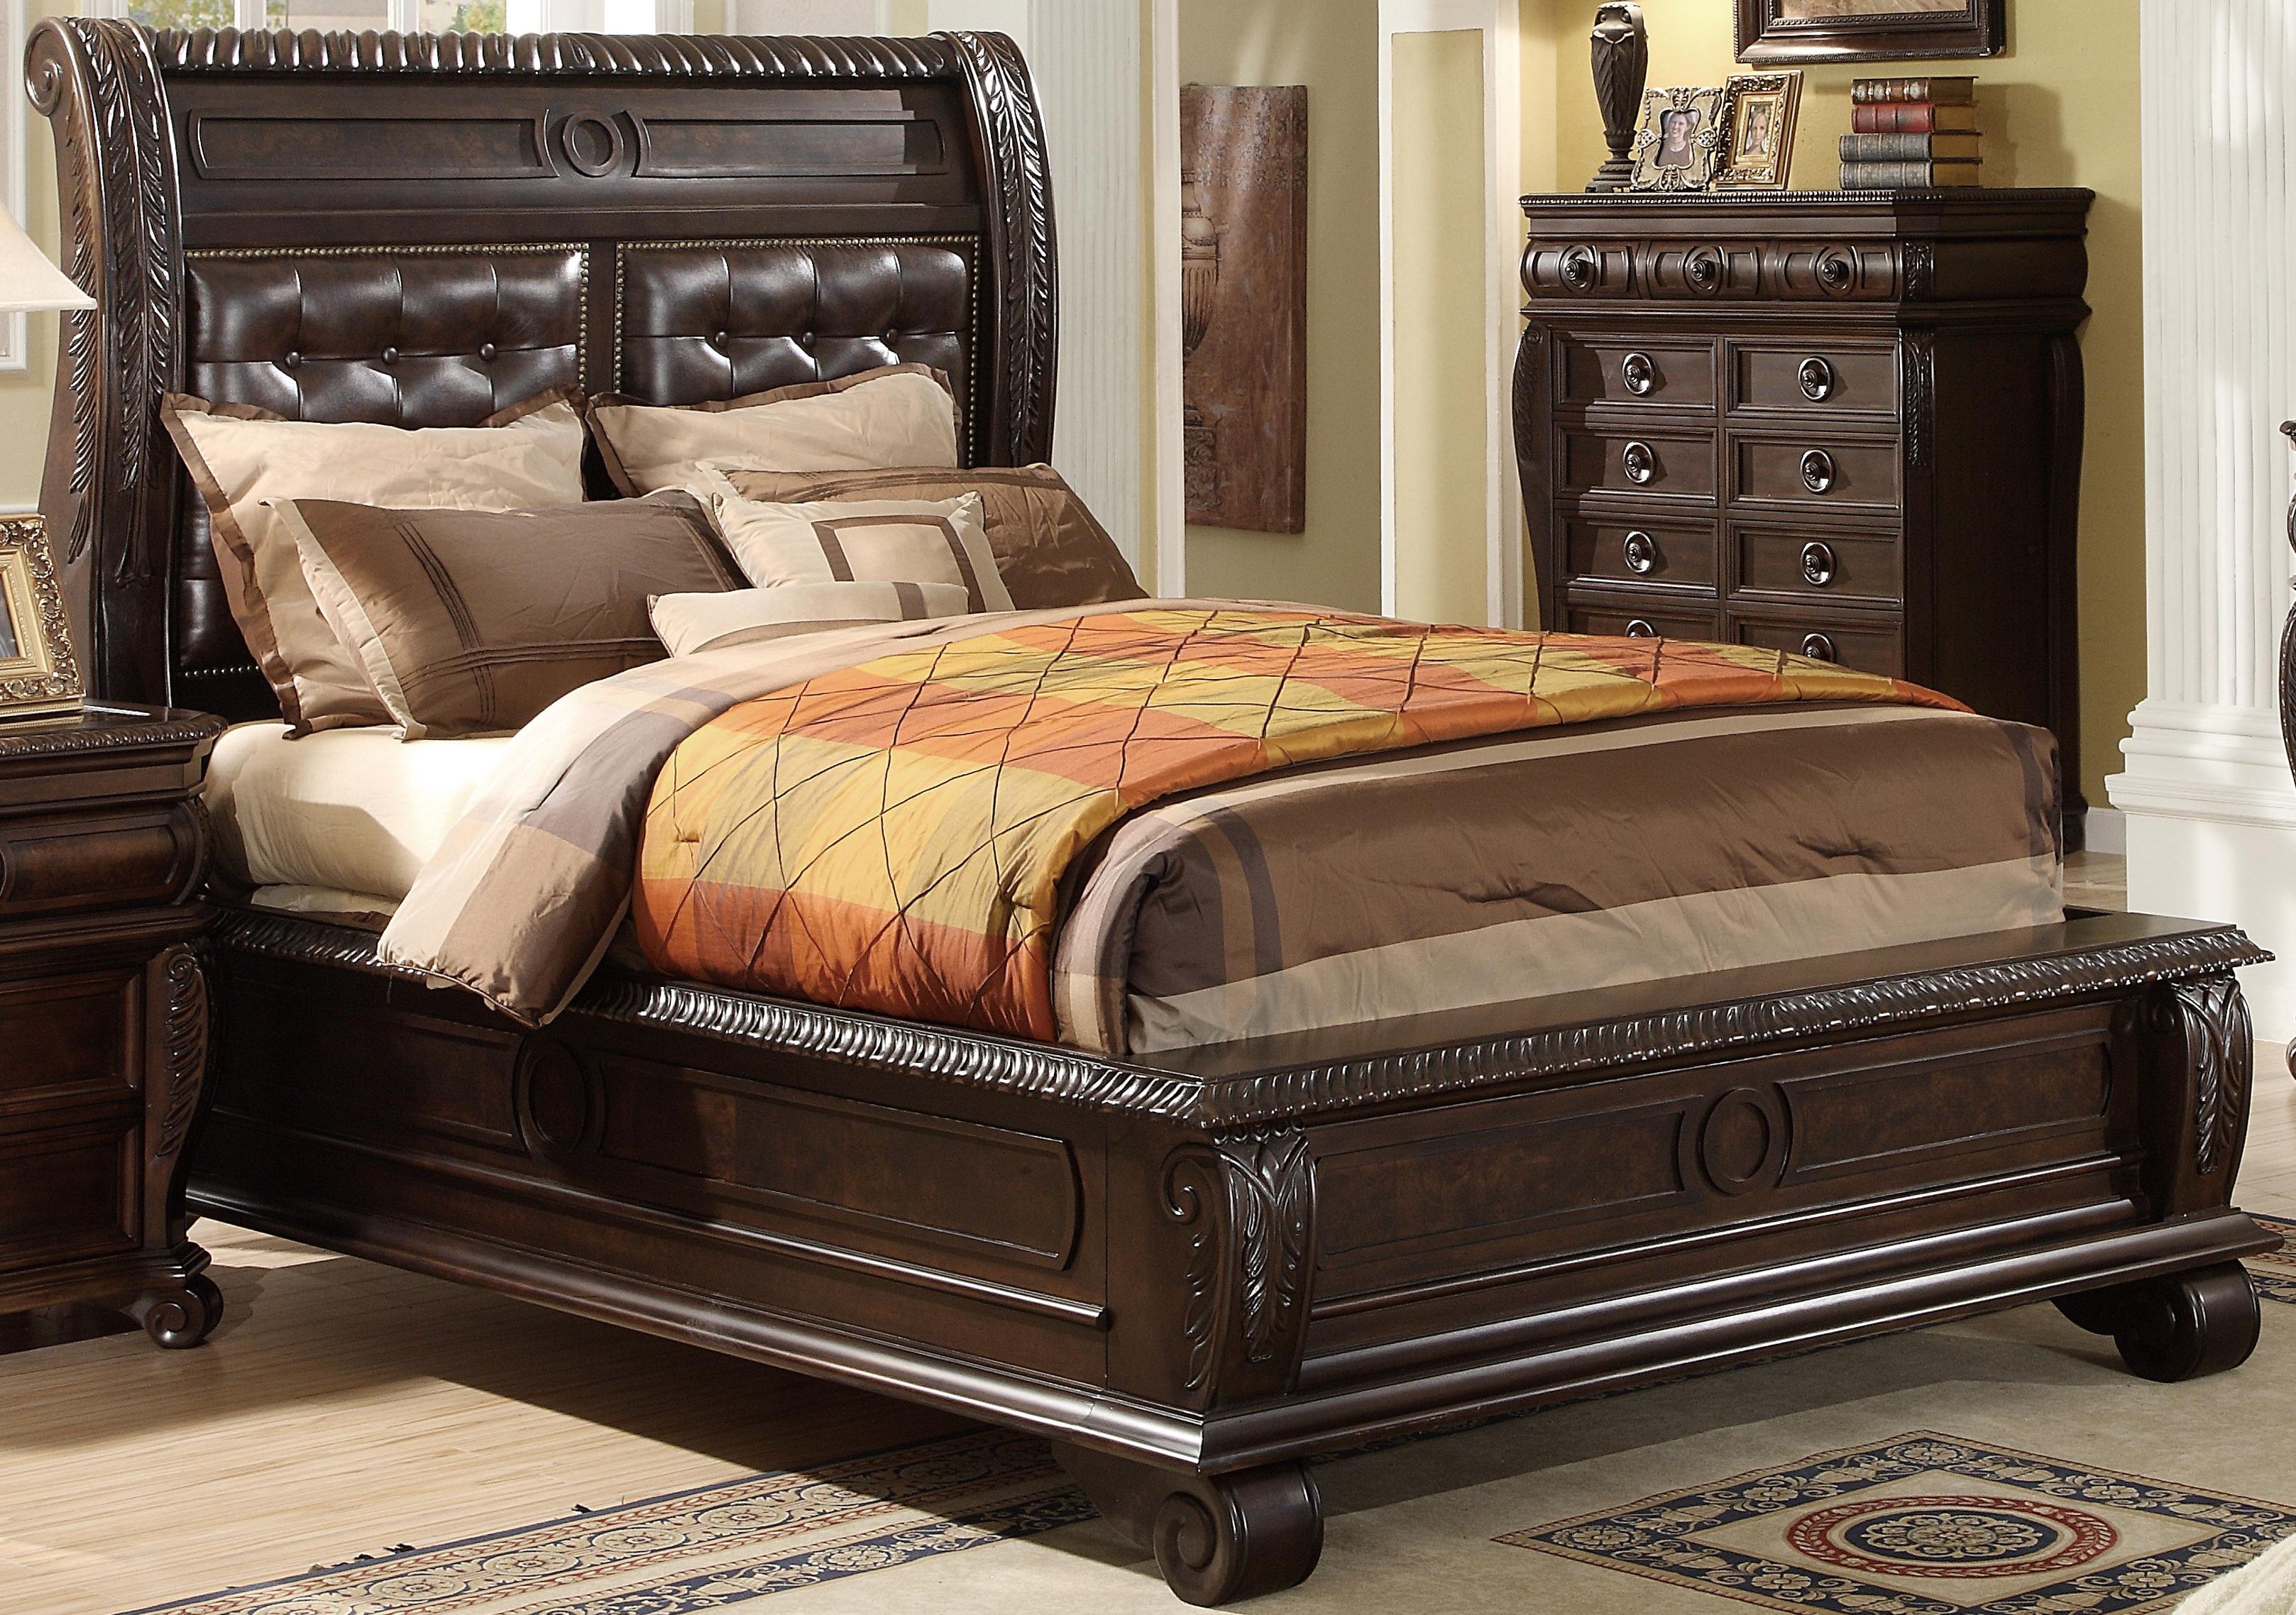 Home Insights B2160 Queen Sleigh Bed